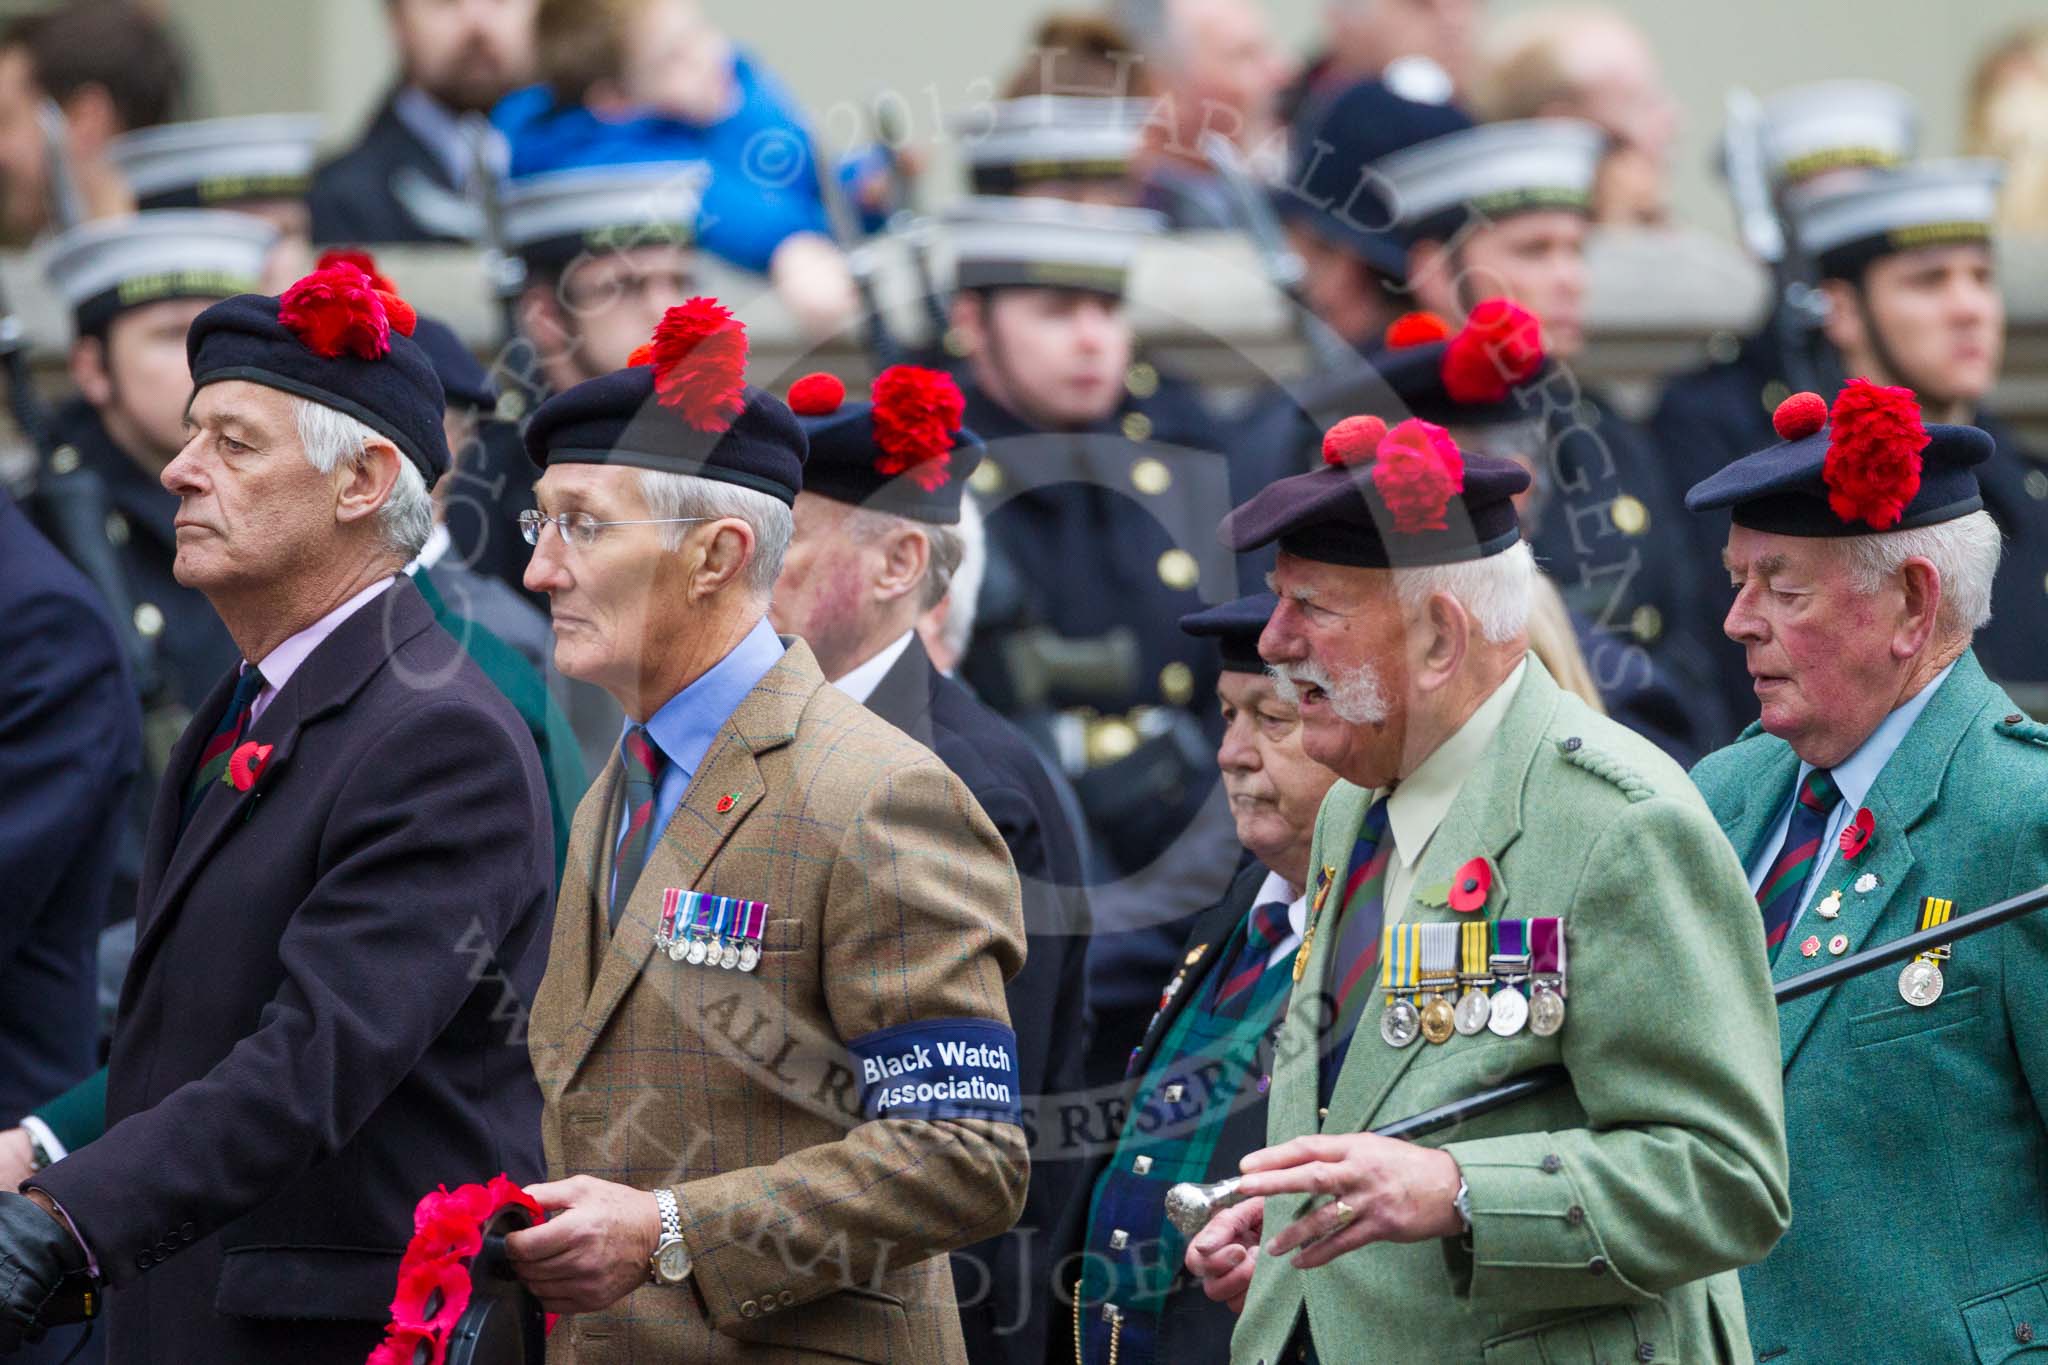 Remembrance Sunday at the Cenotaph 2015: Group A5, Black Watch Association.
Cenotaph, Whitehall, London SW1,
London,
Greater London,
United Kingdom,
on 08 November 2015 at 12:09, image #1213